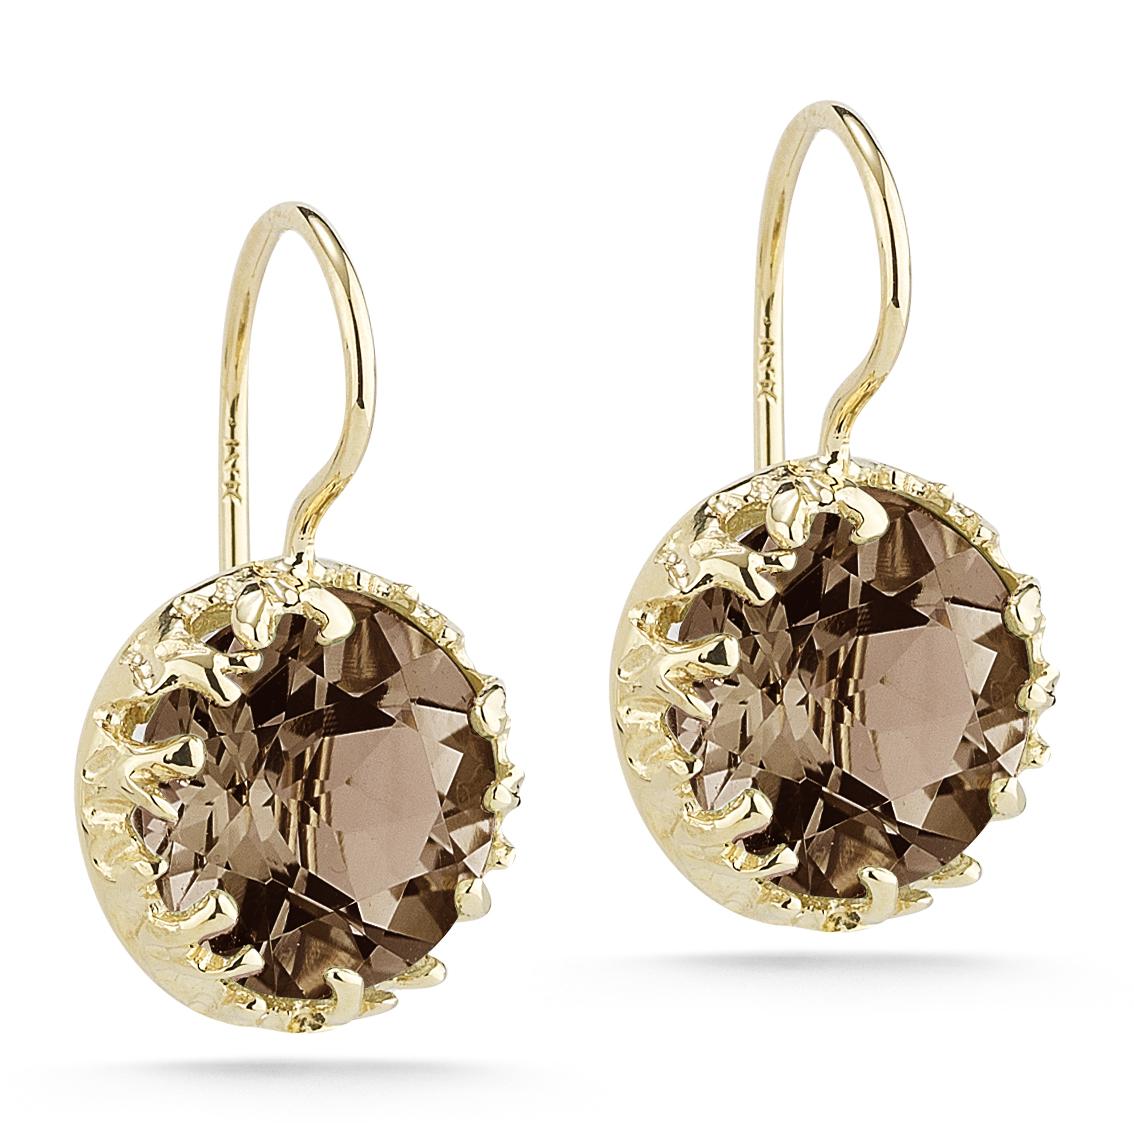 14 Karat Yellow Gold Hand-Crafted Polish-Finished Drop Earrings, Centered with a 10mm 7.0CT Round Checkerboard-Cut Semi-Precious Smokey Topaz Color Stone, Accented with 0.03 Carats of Bezel Set Diamonds on a Kidney Wire Back Finding
